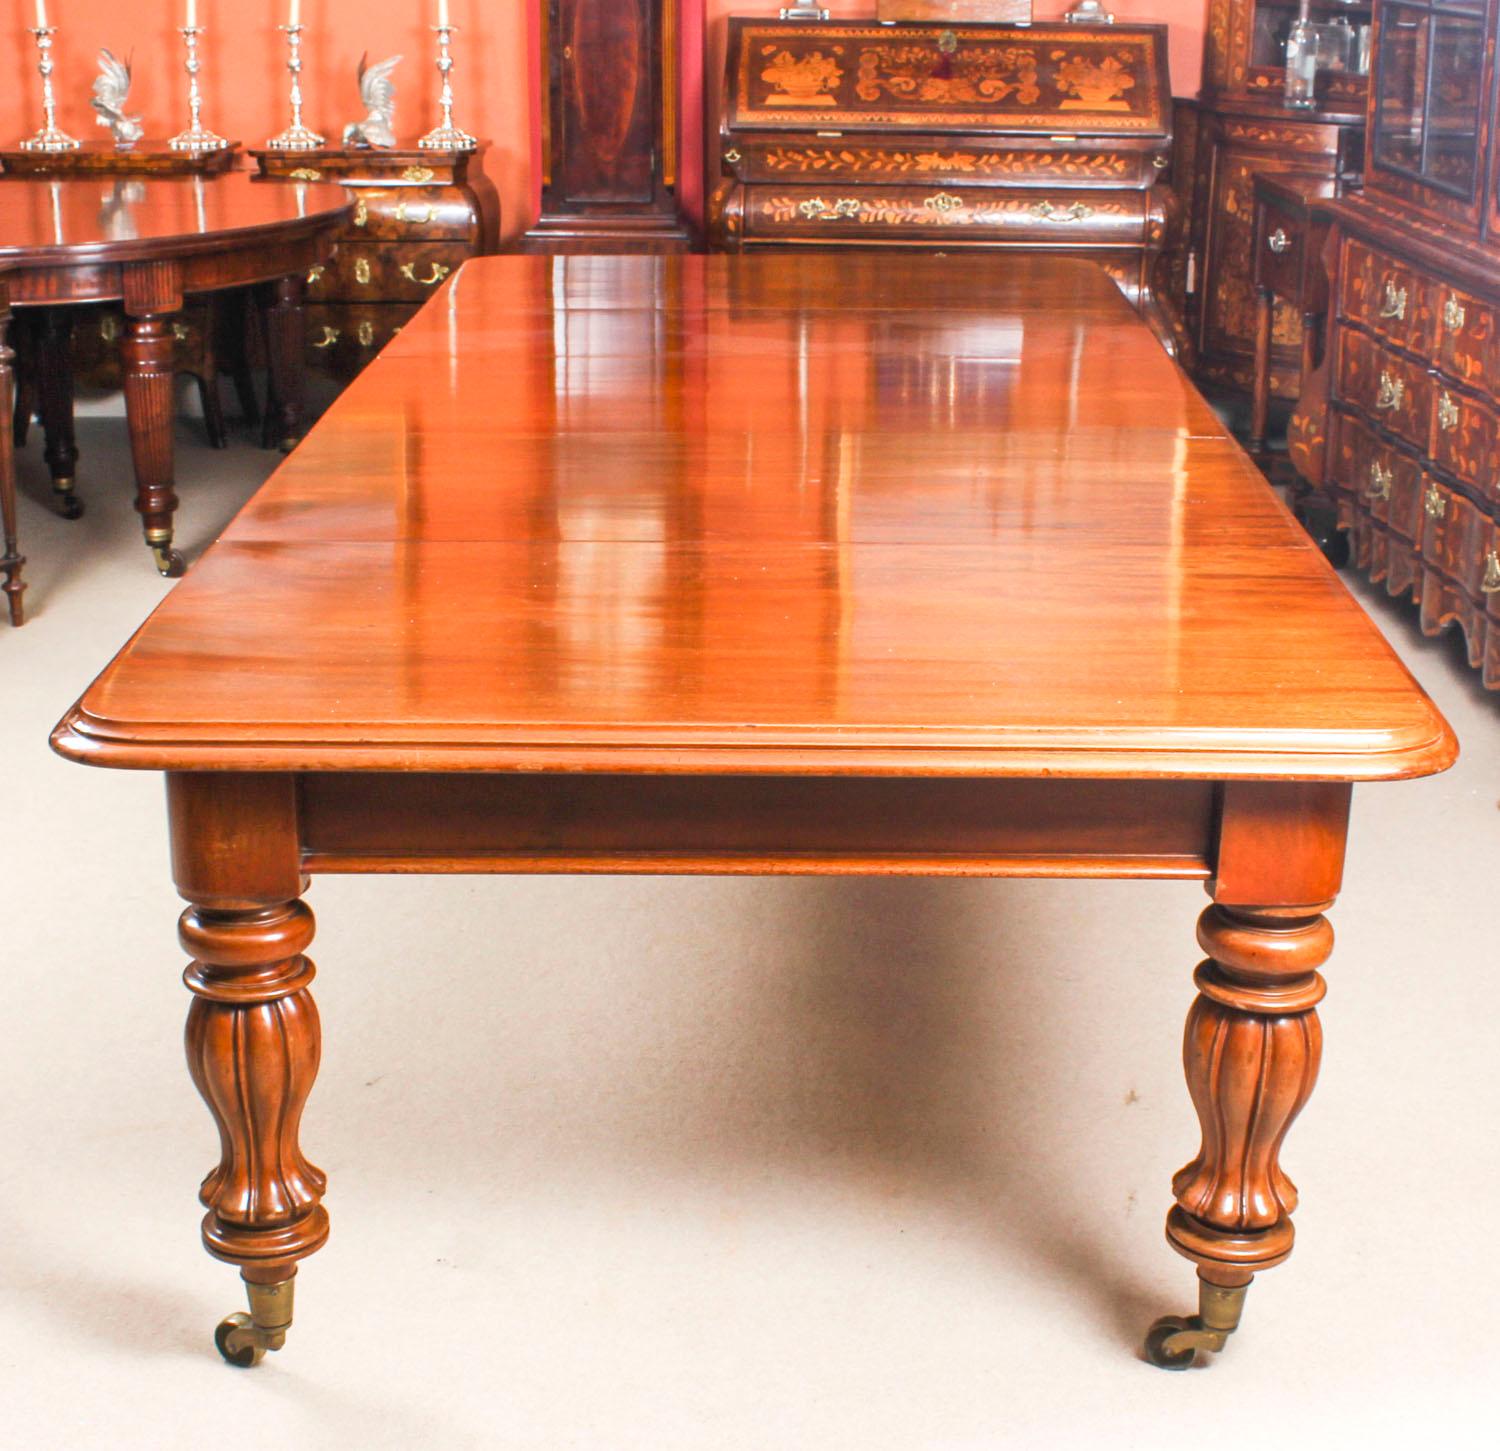 Victorian Antique Flame Mahogany Extending Dining Table, 19th Century